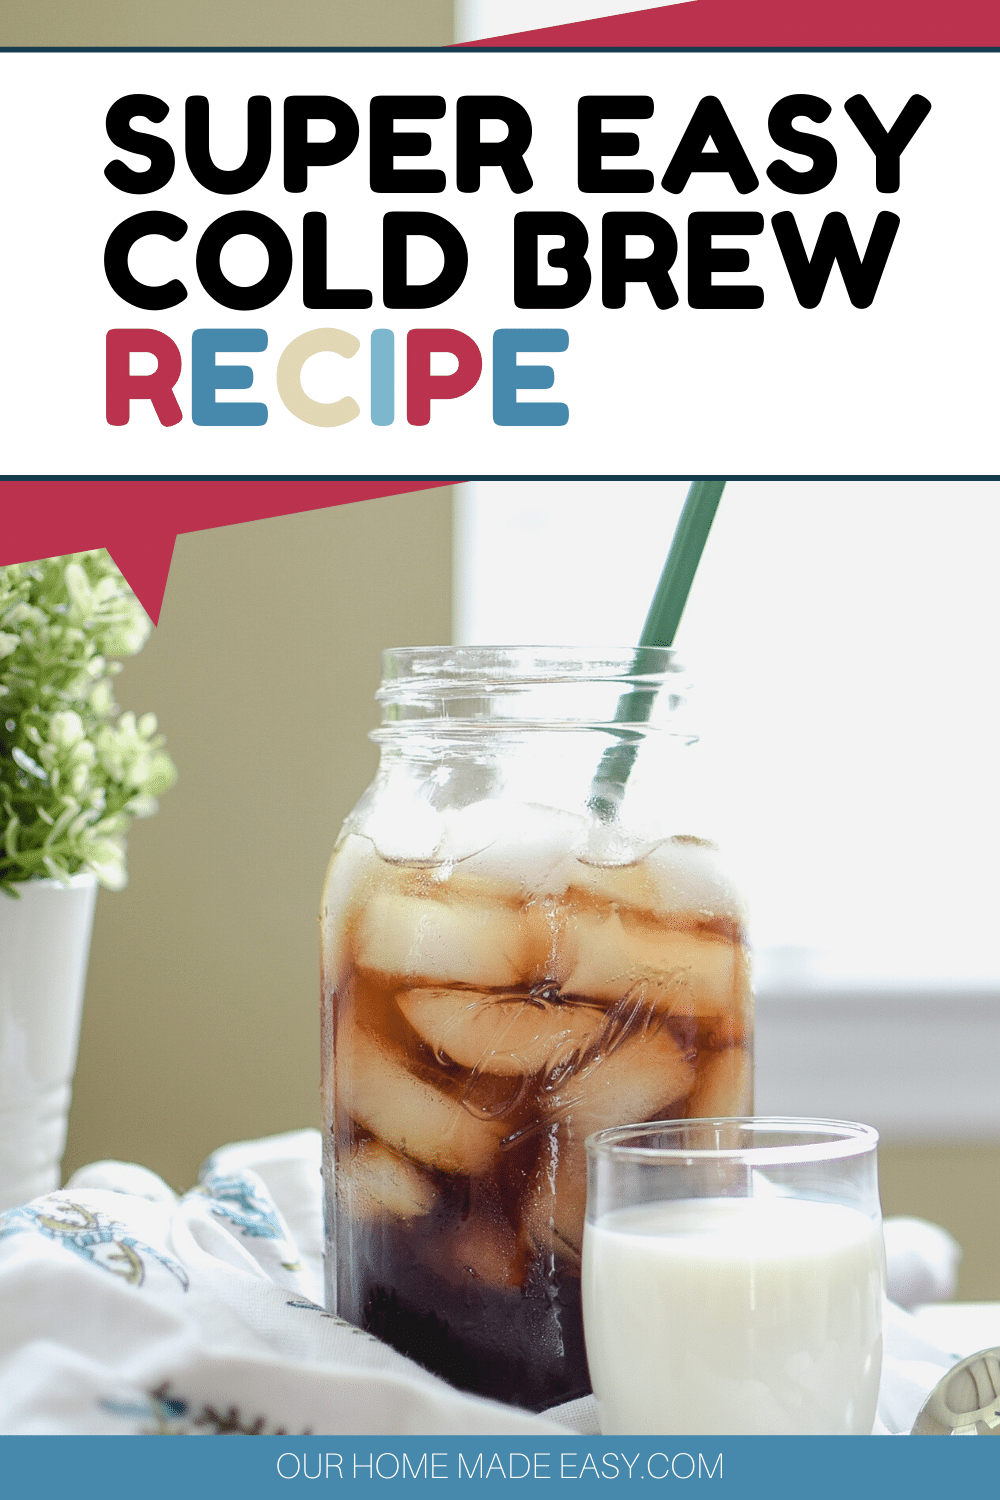 https://www.ourhomemadeeasy.com/wp-content/uploads/2018/05/cold-brew-recipe.png